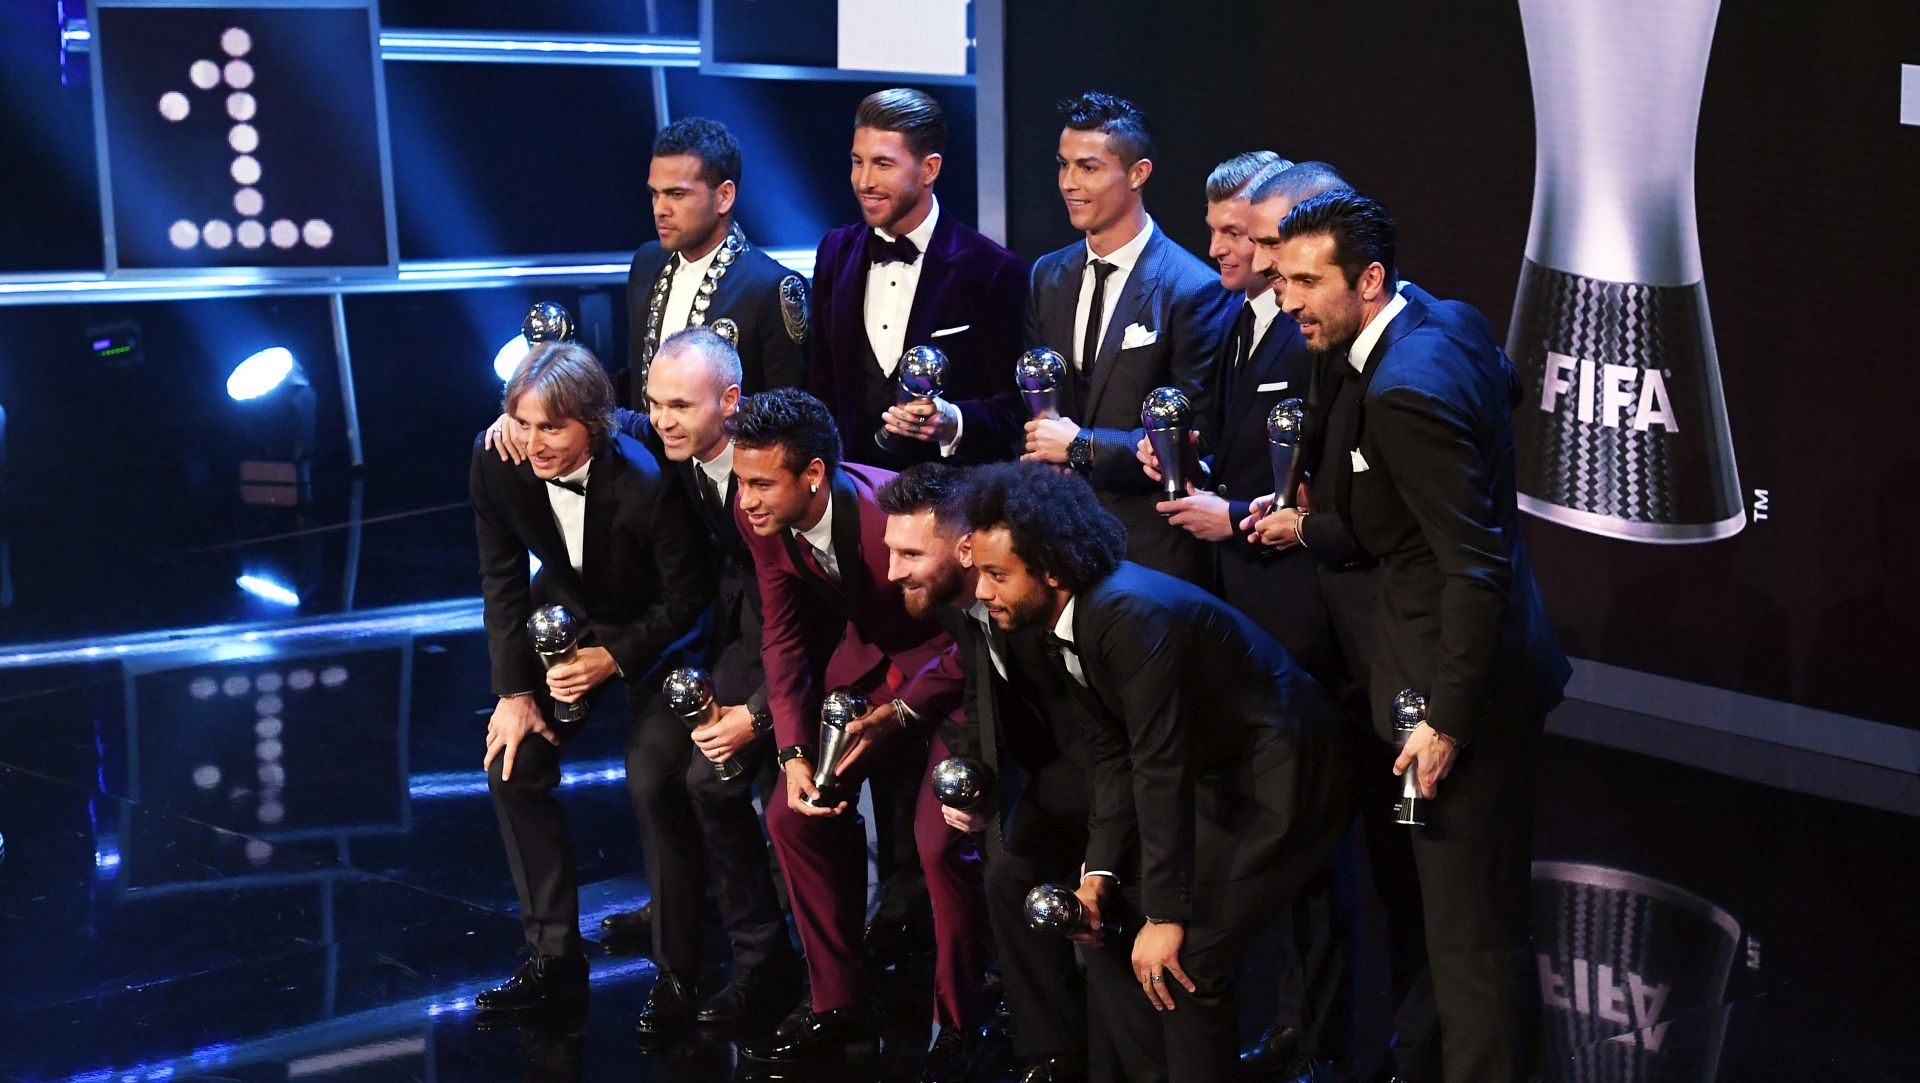 epa06284974 The players voted into the FIFA World 11 pose for a picture during the Best FIFA Football Awards 2017 at the London Palladium, London, Britain 23 October 2017.  EPA/ANDY RAIN